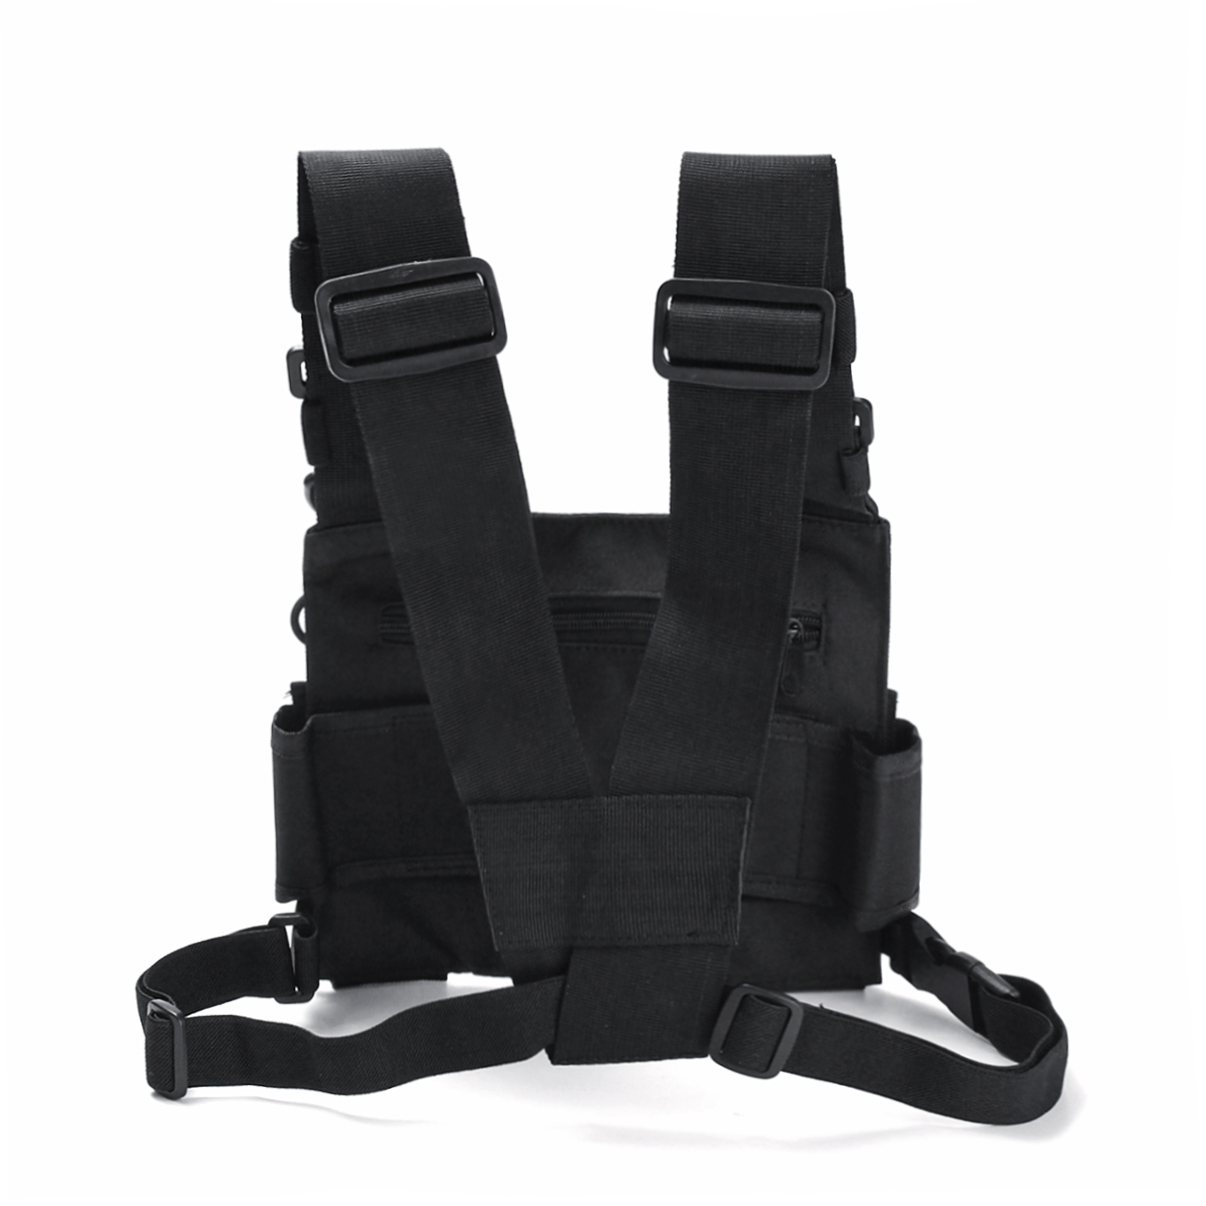 Find Chest 3 Pocket Harness Nylon Bag Pack Backpack Holster for Radio Walkie Talkie Two Way Radio for Sale on Gipsybee.com with cryptocurrencies